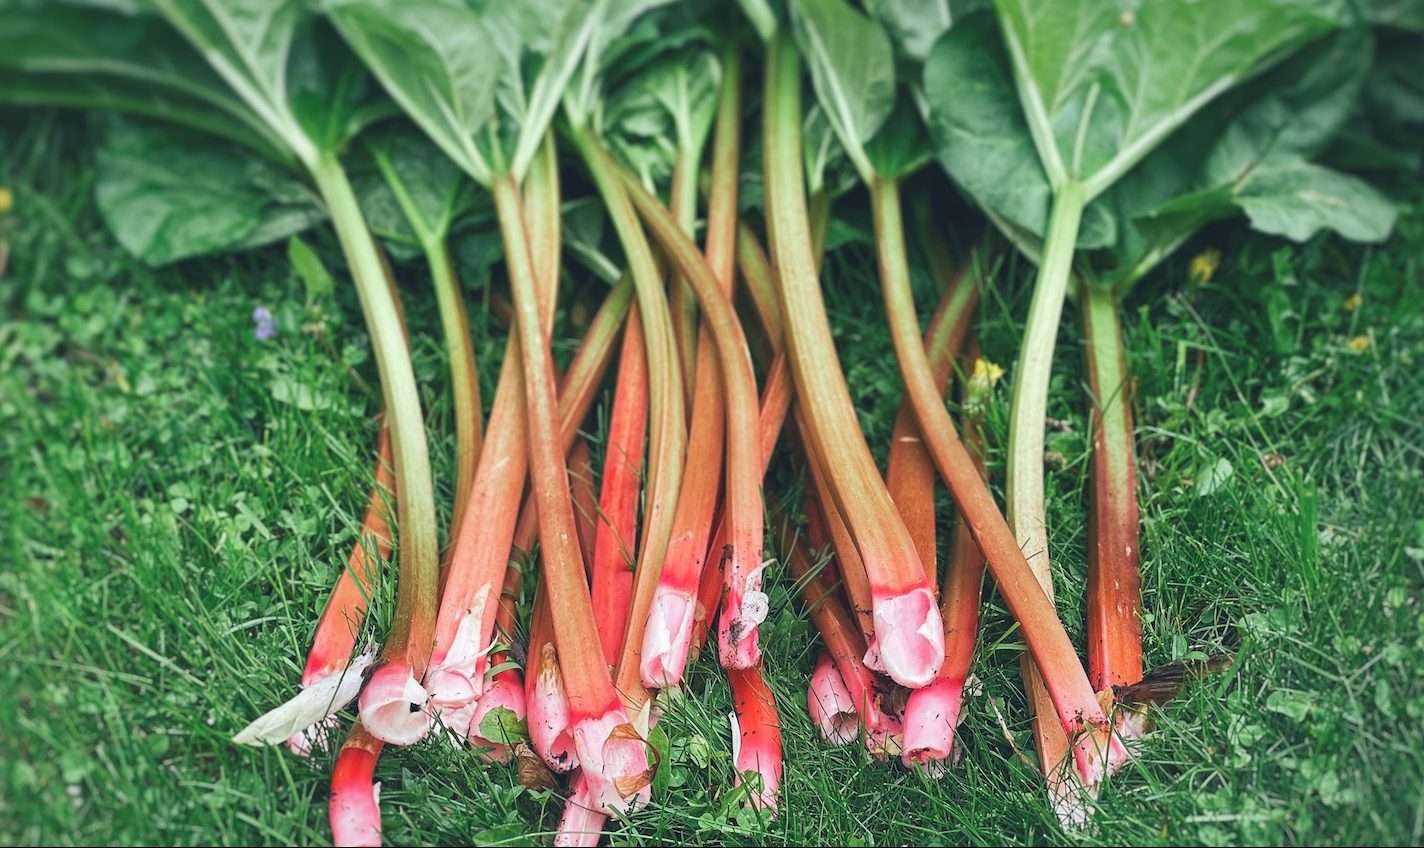 Rhubarb freshly picked and laying on the grass after harvest